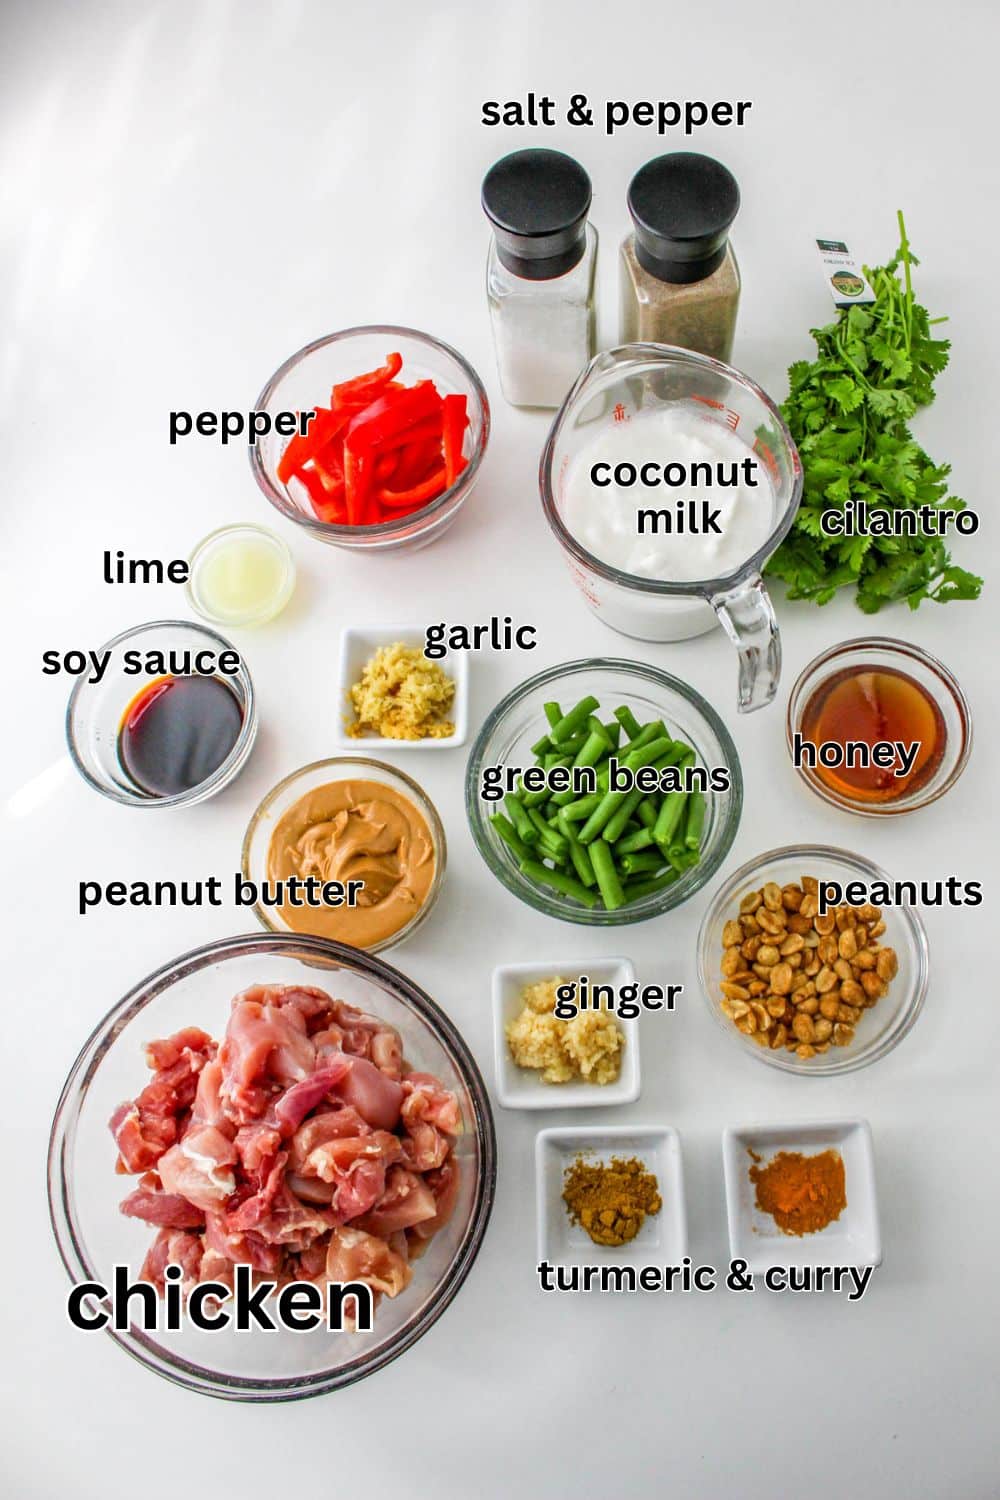 Slow Cooker Chicken Satay ingredients in small bowls on table - chicken, curry, turmeric, honey, green beans, salt and pepper, red peppers, cilantro, soy sauce, peanut butter, garlic, etc.